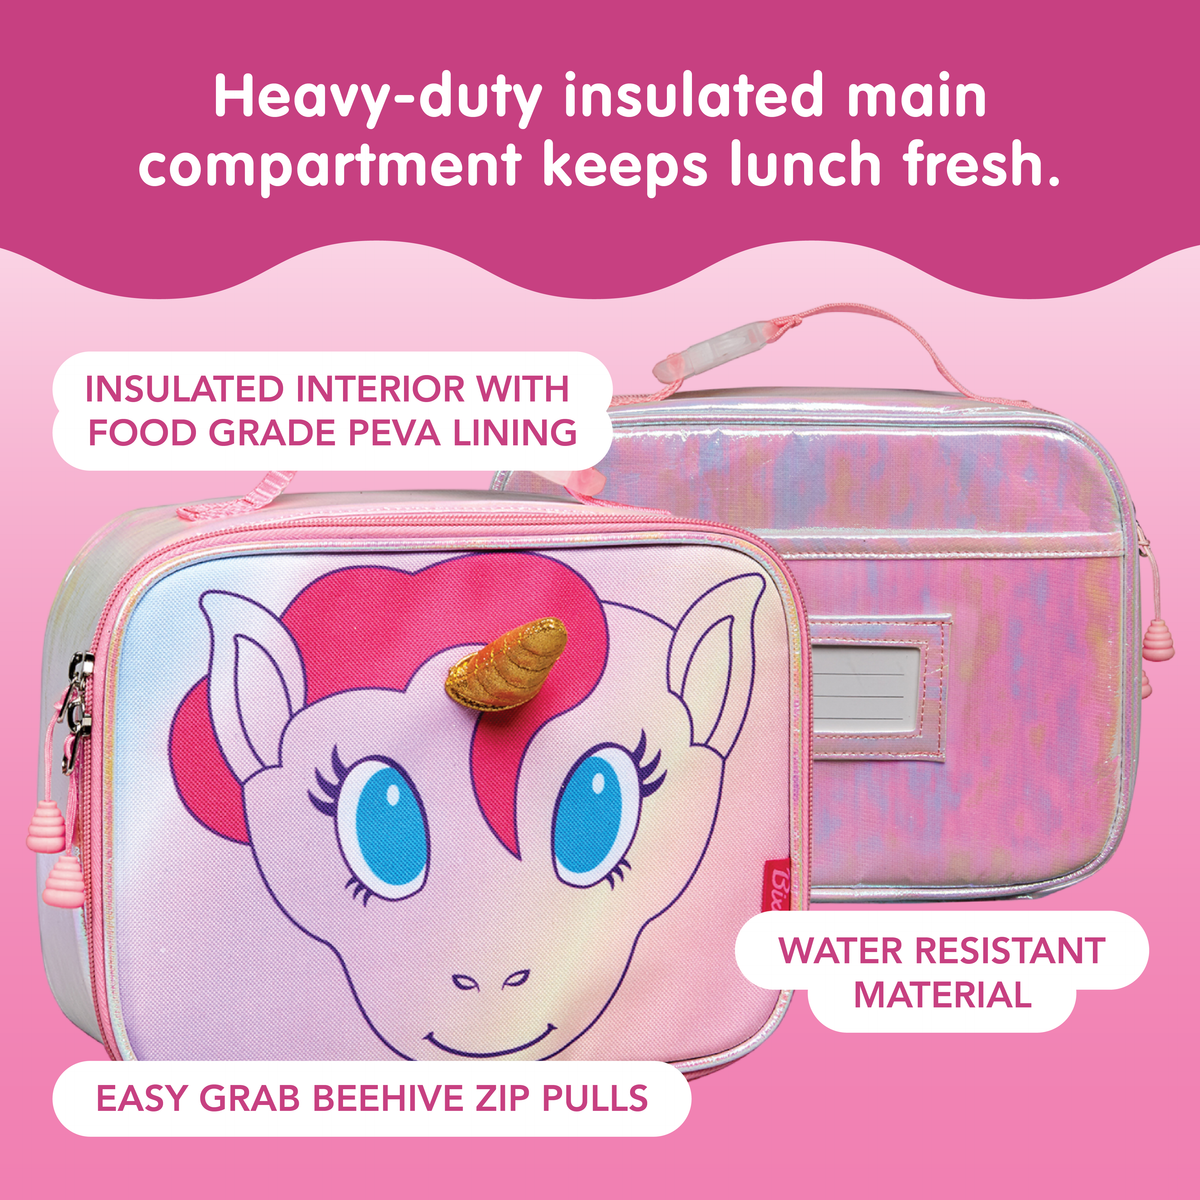 9 Best Unicorn Lunch Box For Girls for 2023